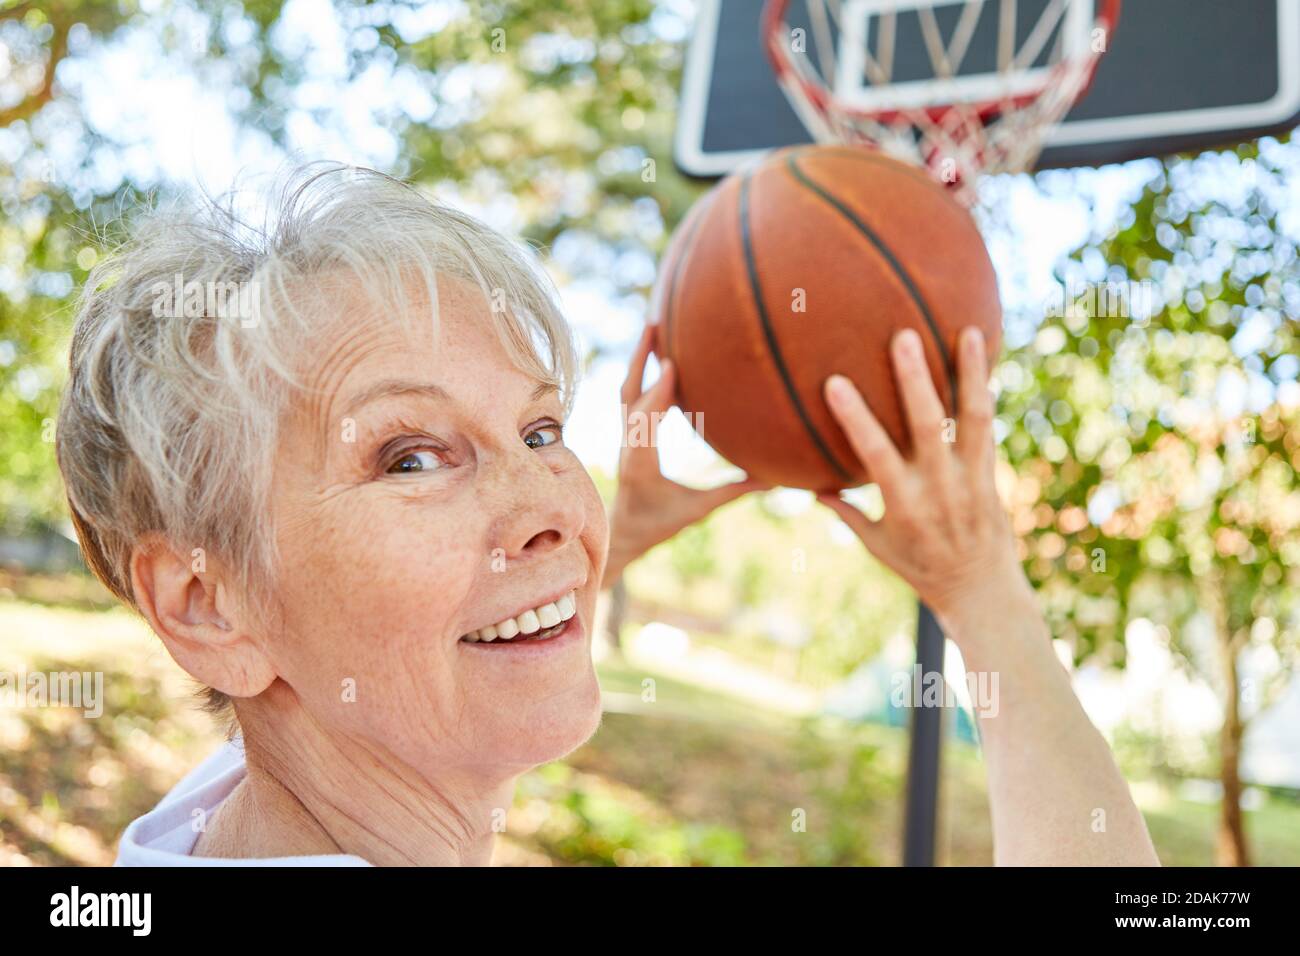 Smiling senior citizen as a sporty and vital pensioner playing basketball in the garden Stock Photo